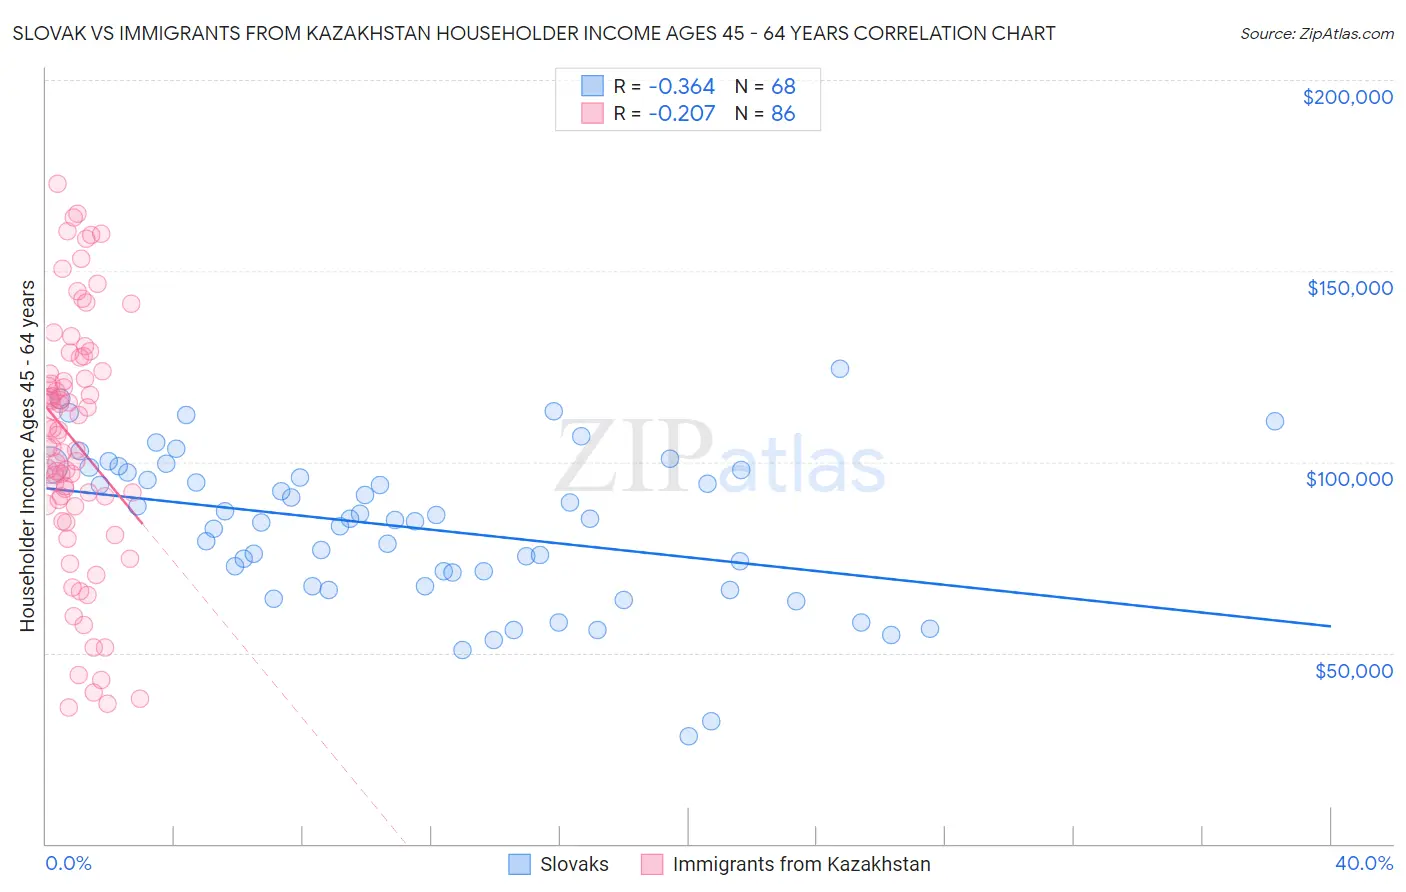 Slovak vs Immigrants from Kazakhstan Householder Income Ages 45 - 64 years